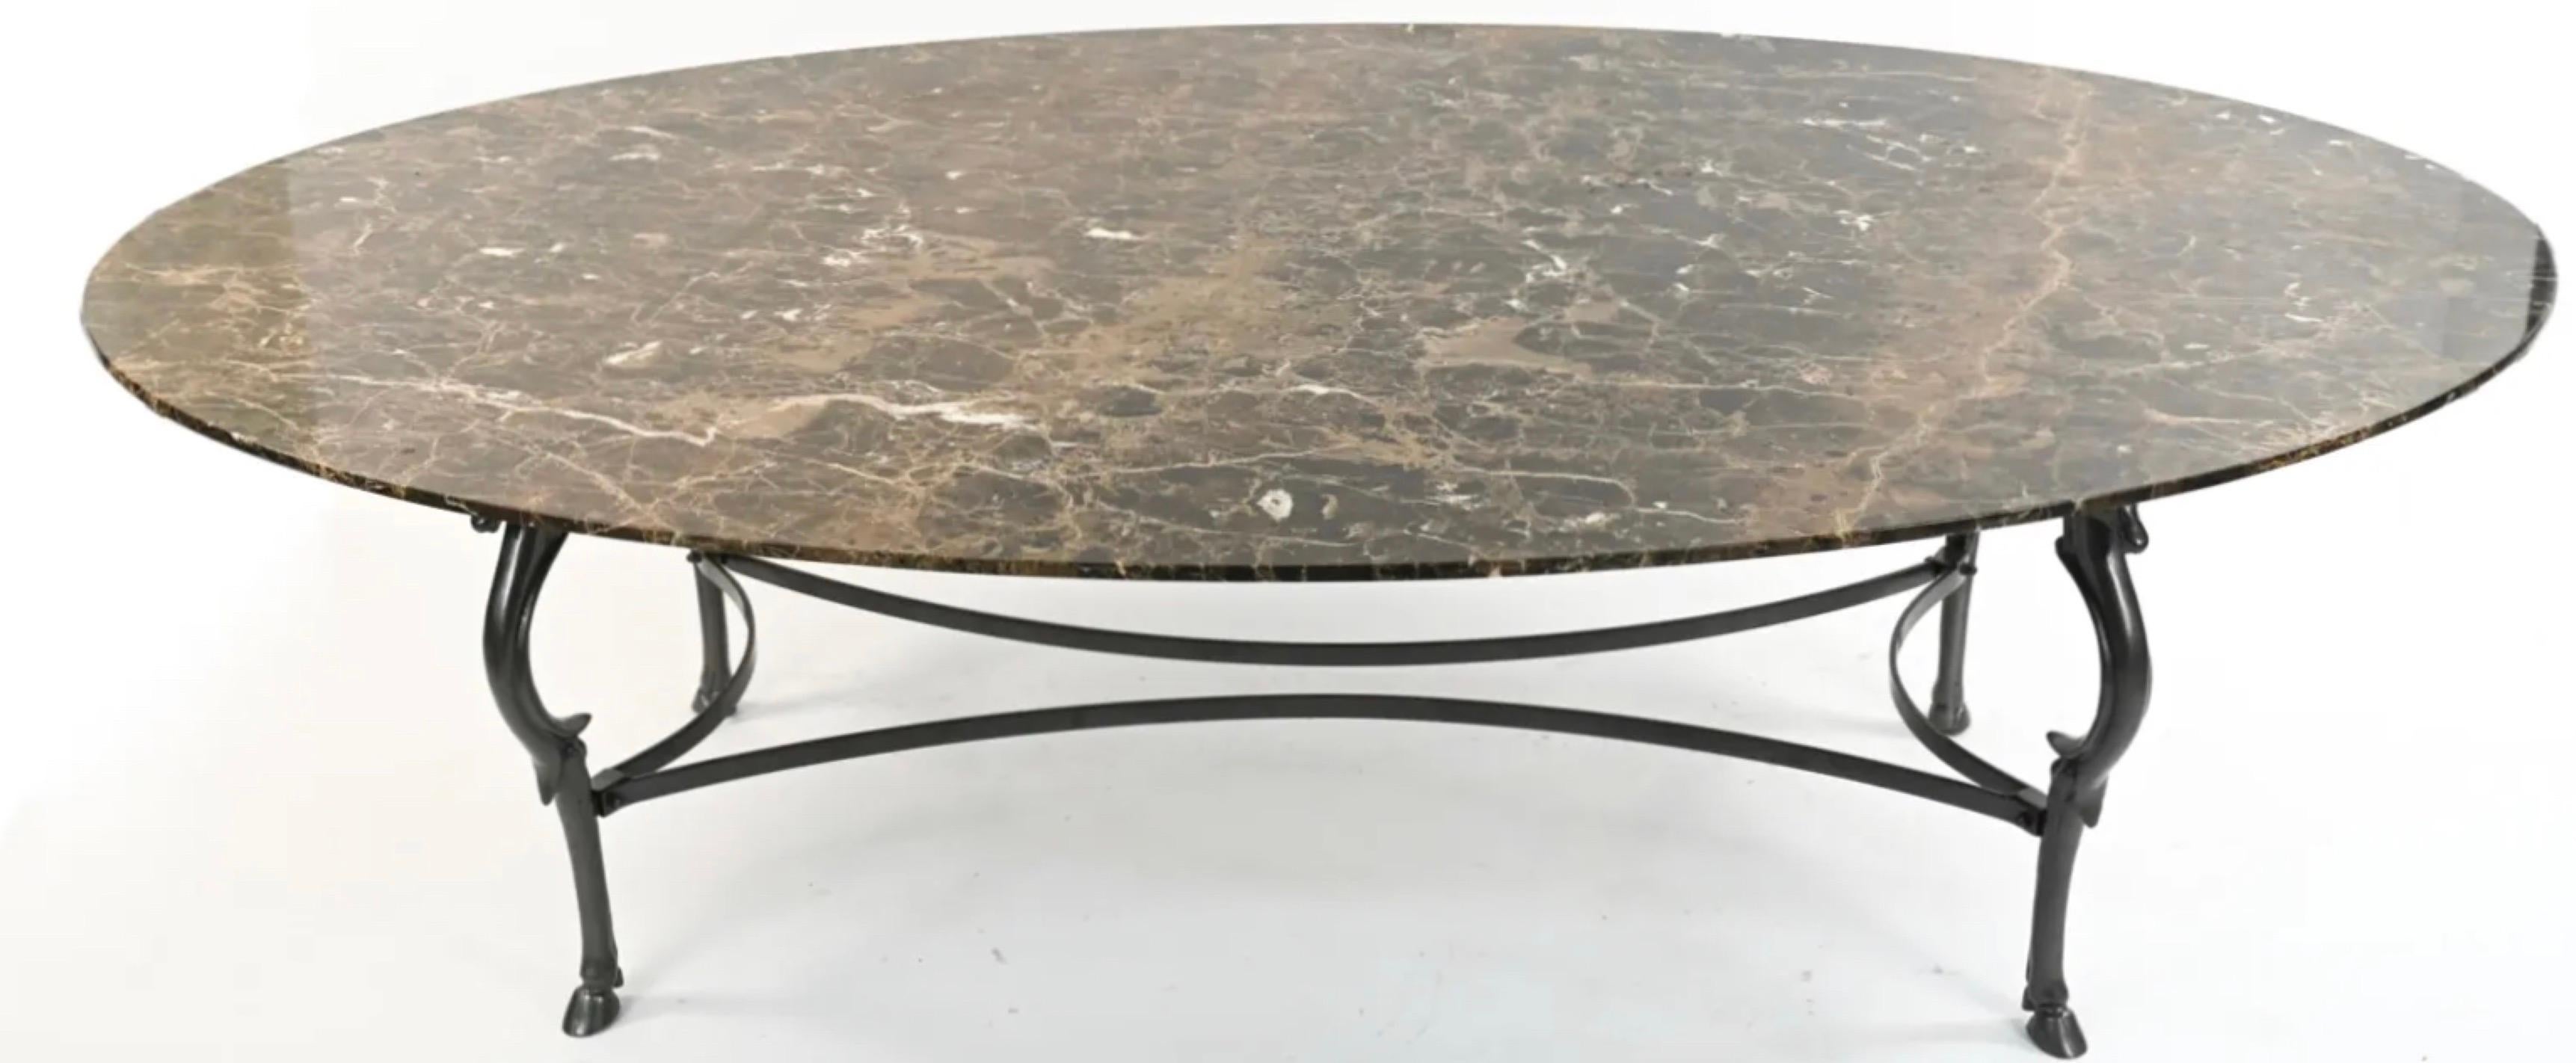 Mid-Century elegant custom designed oval marble dining table with gray-lacquered iron base, horse head legs and hoof feet, 1/2